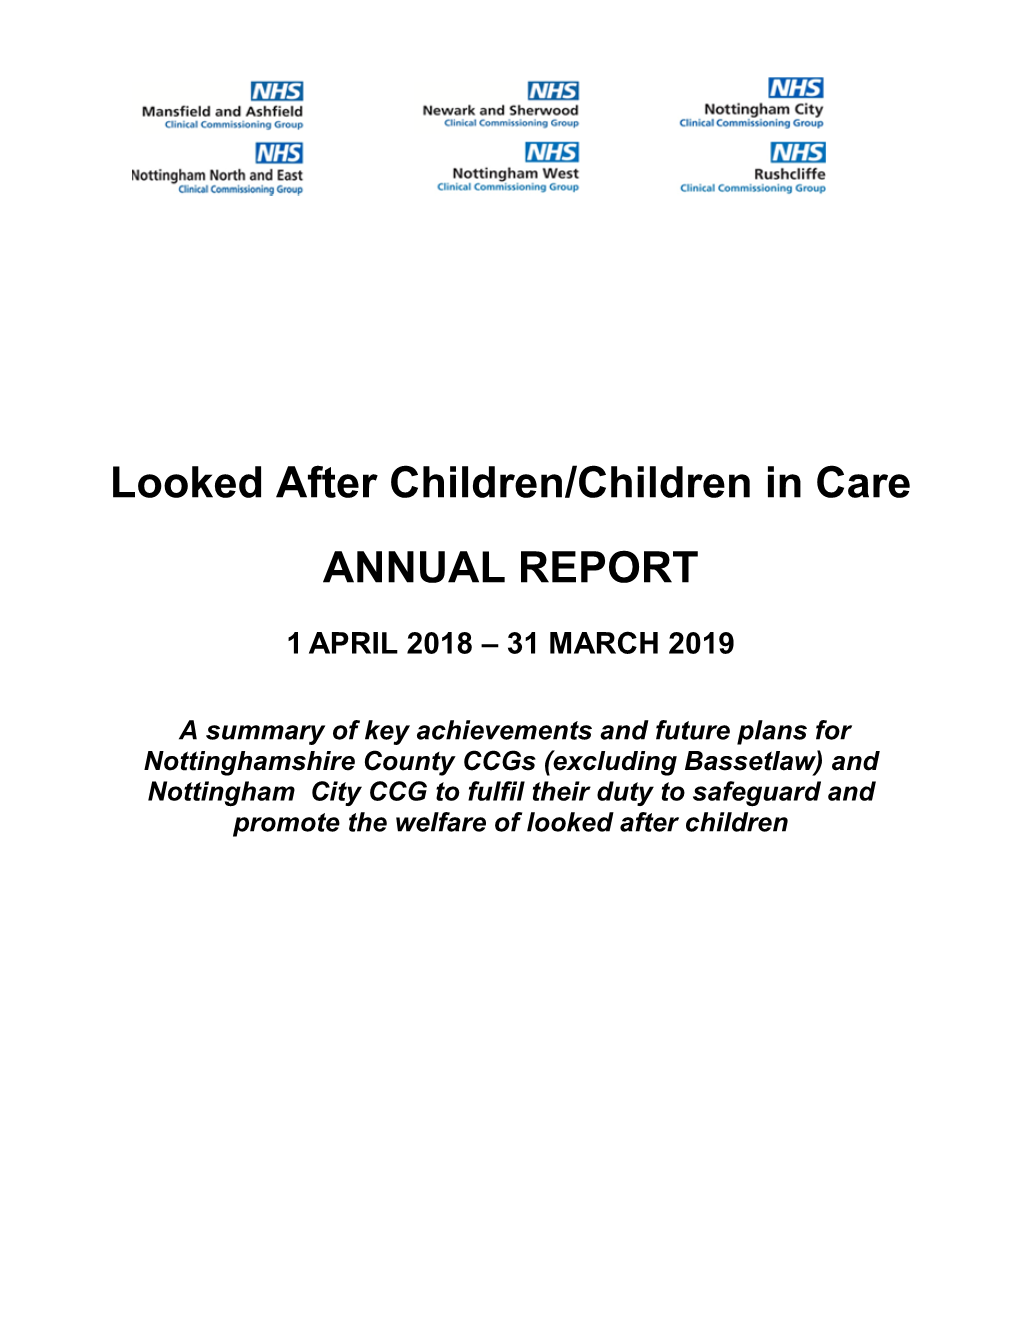 Looked Afer Children Annual Report 2018-19